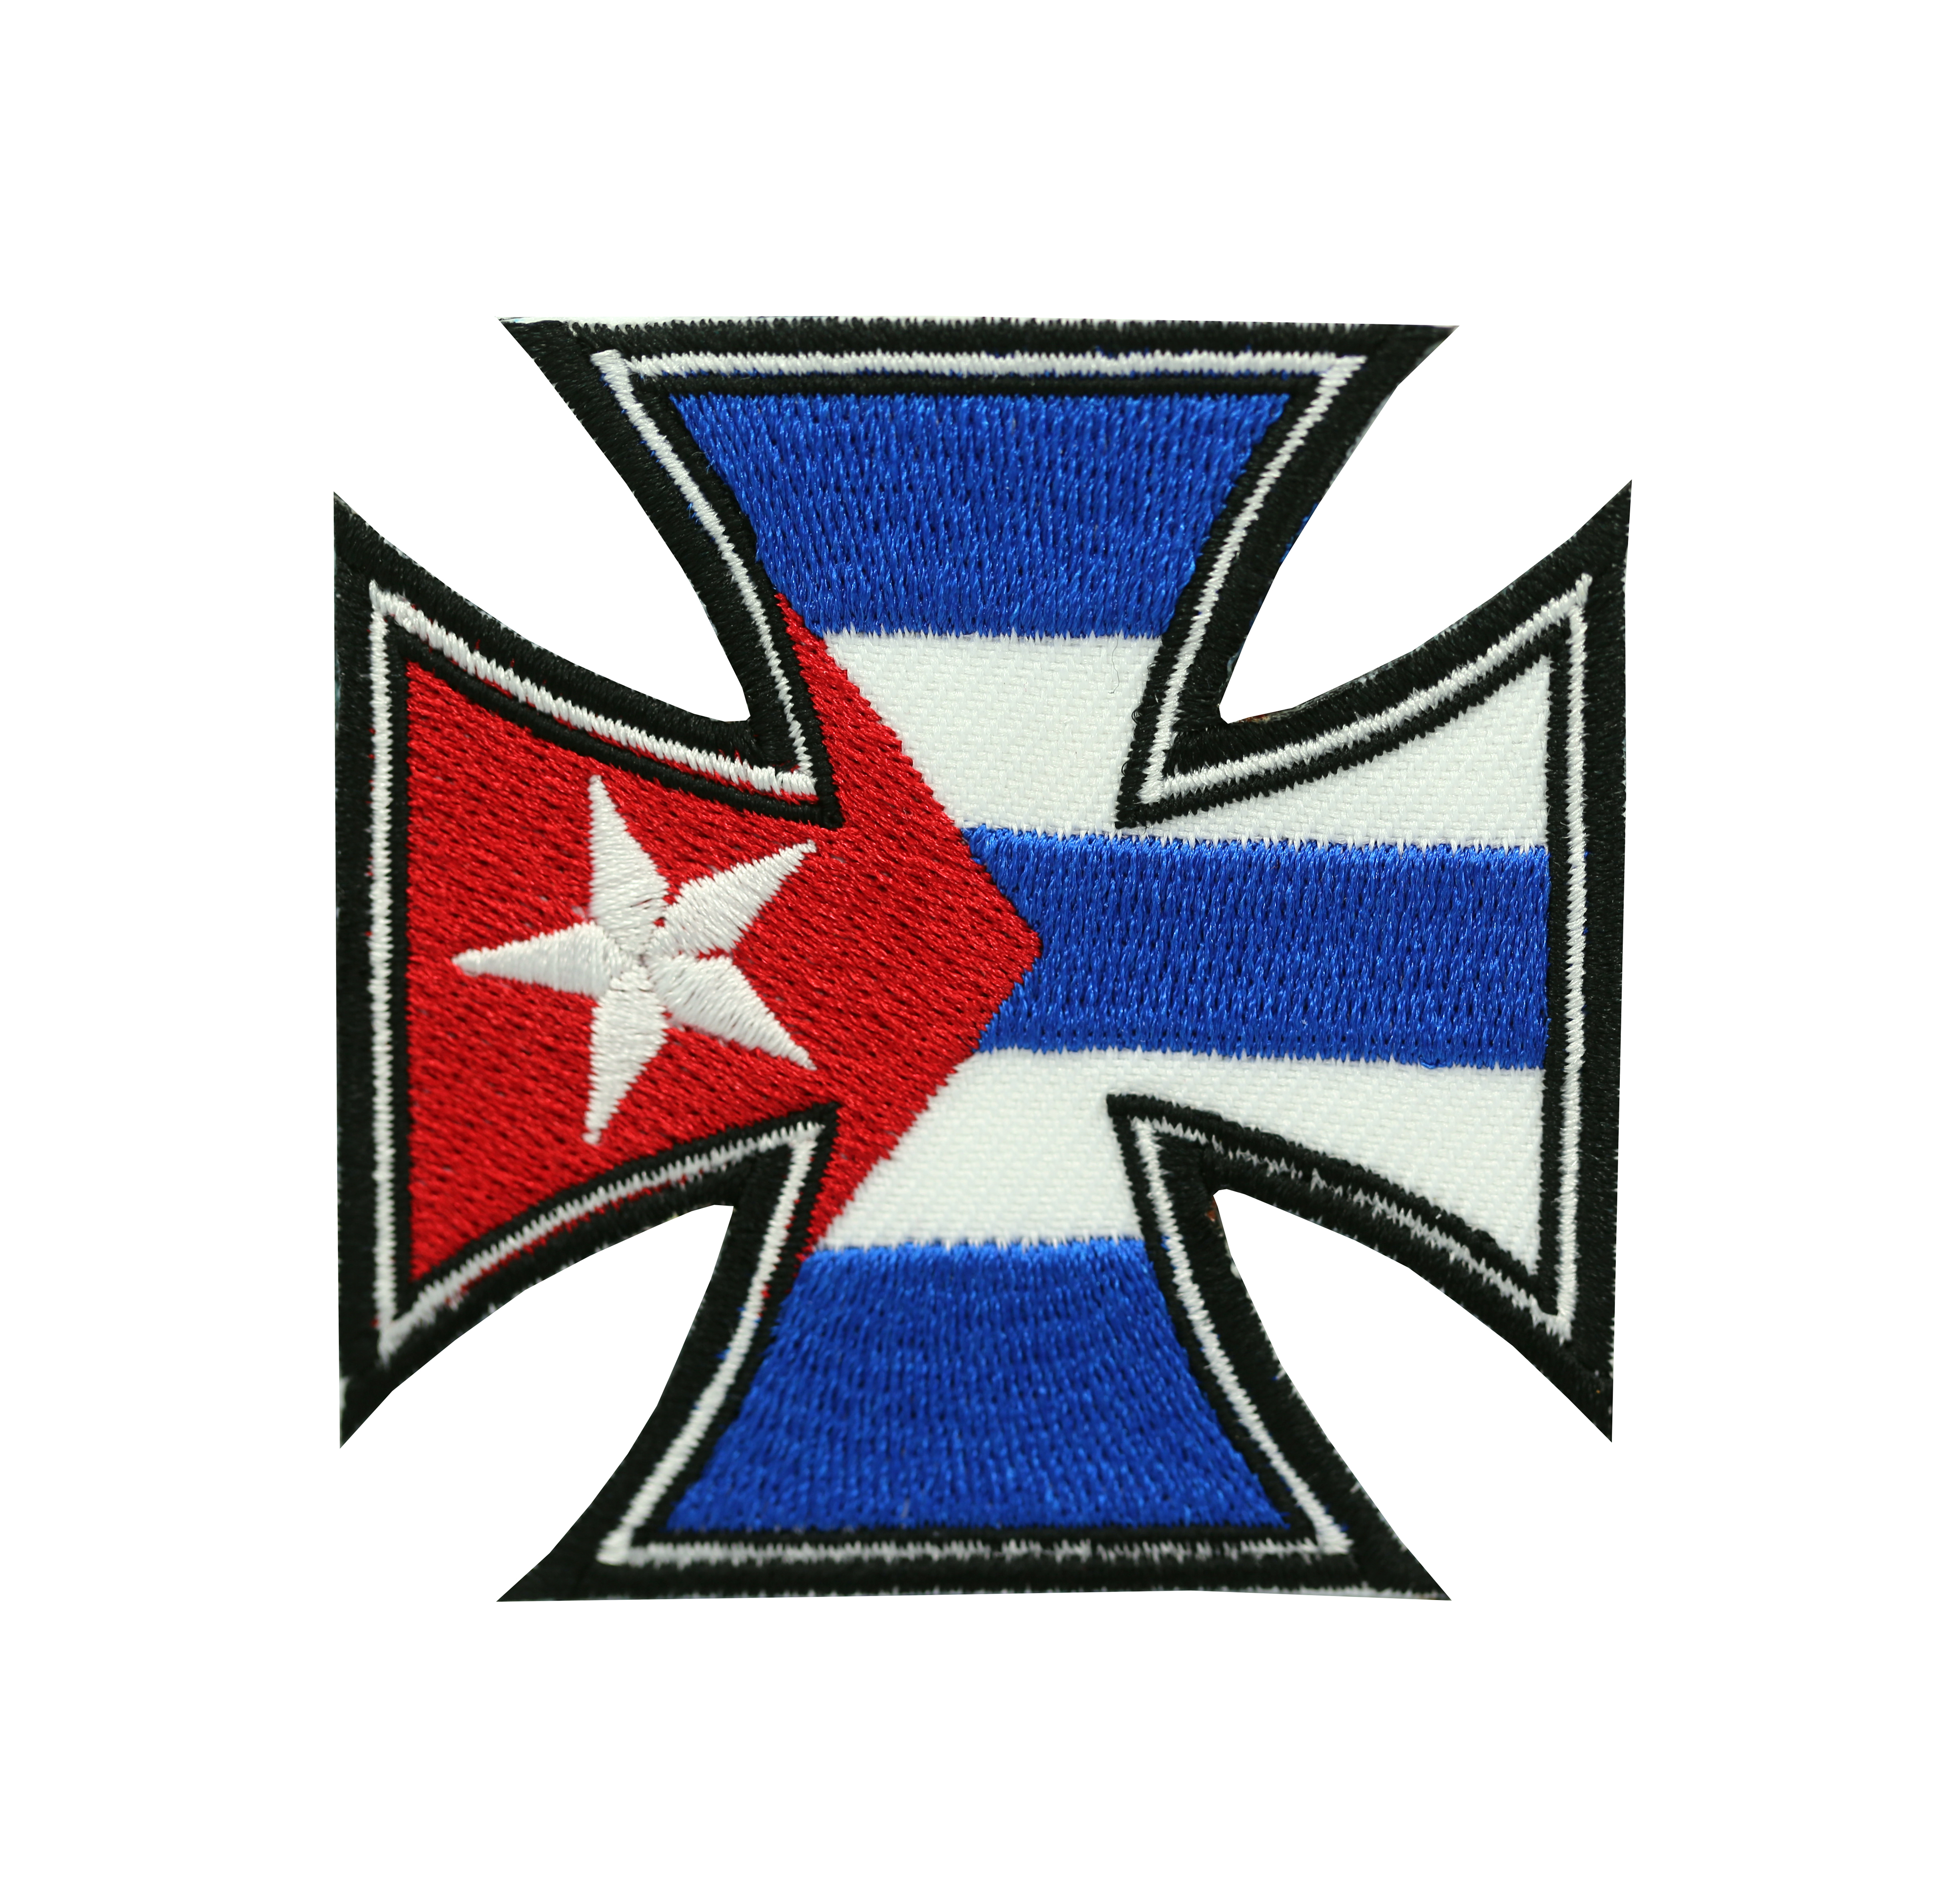 Iron Cross Cuban Flag embroidery Patch